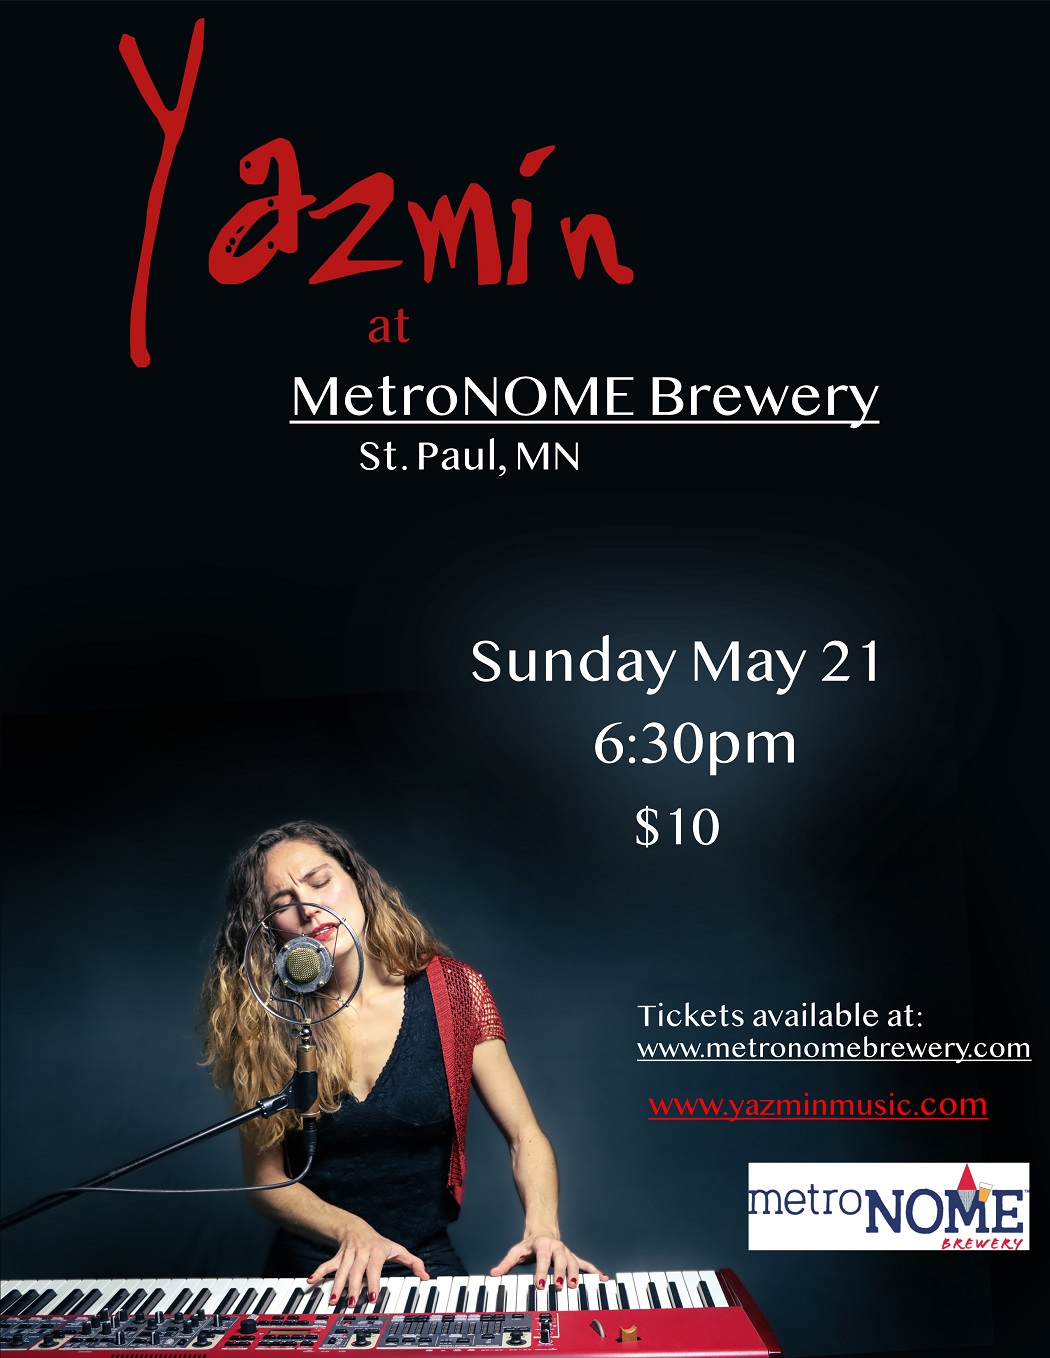 Metronome Brewery Flyer